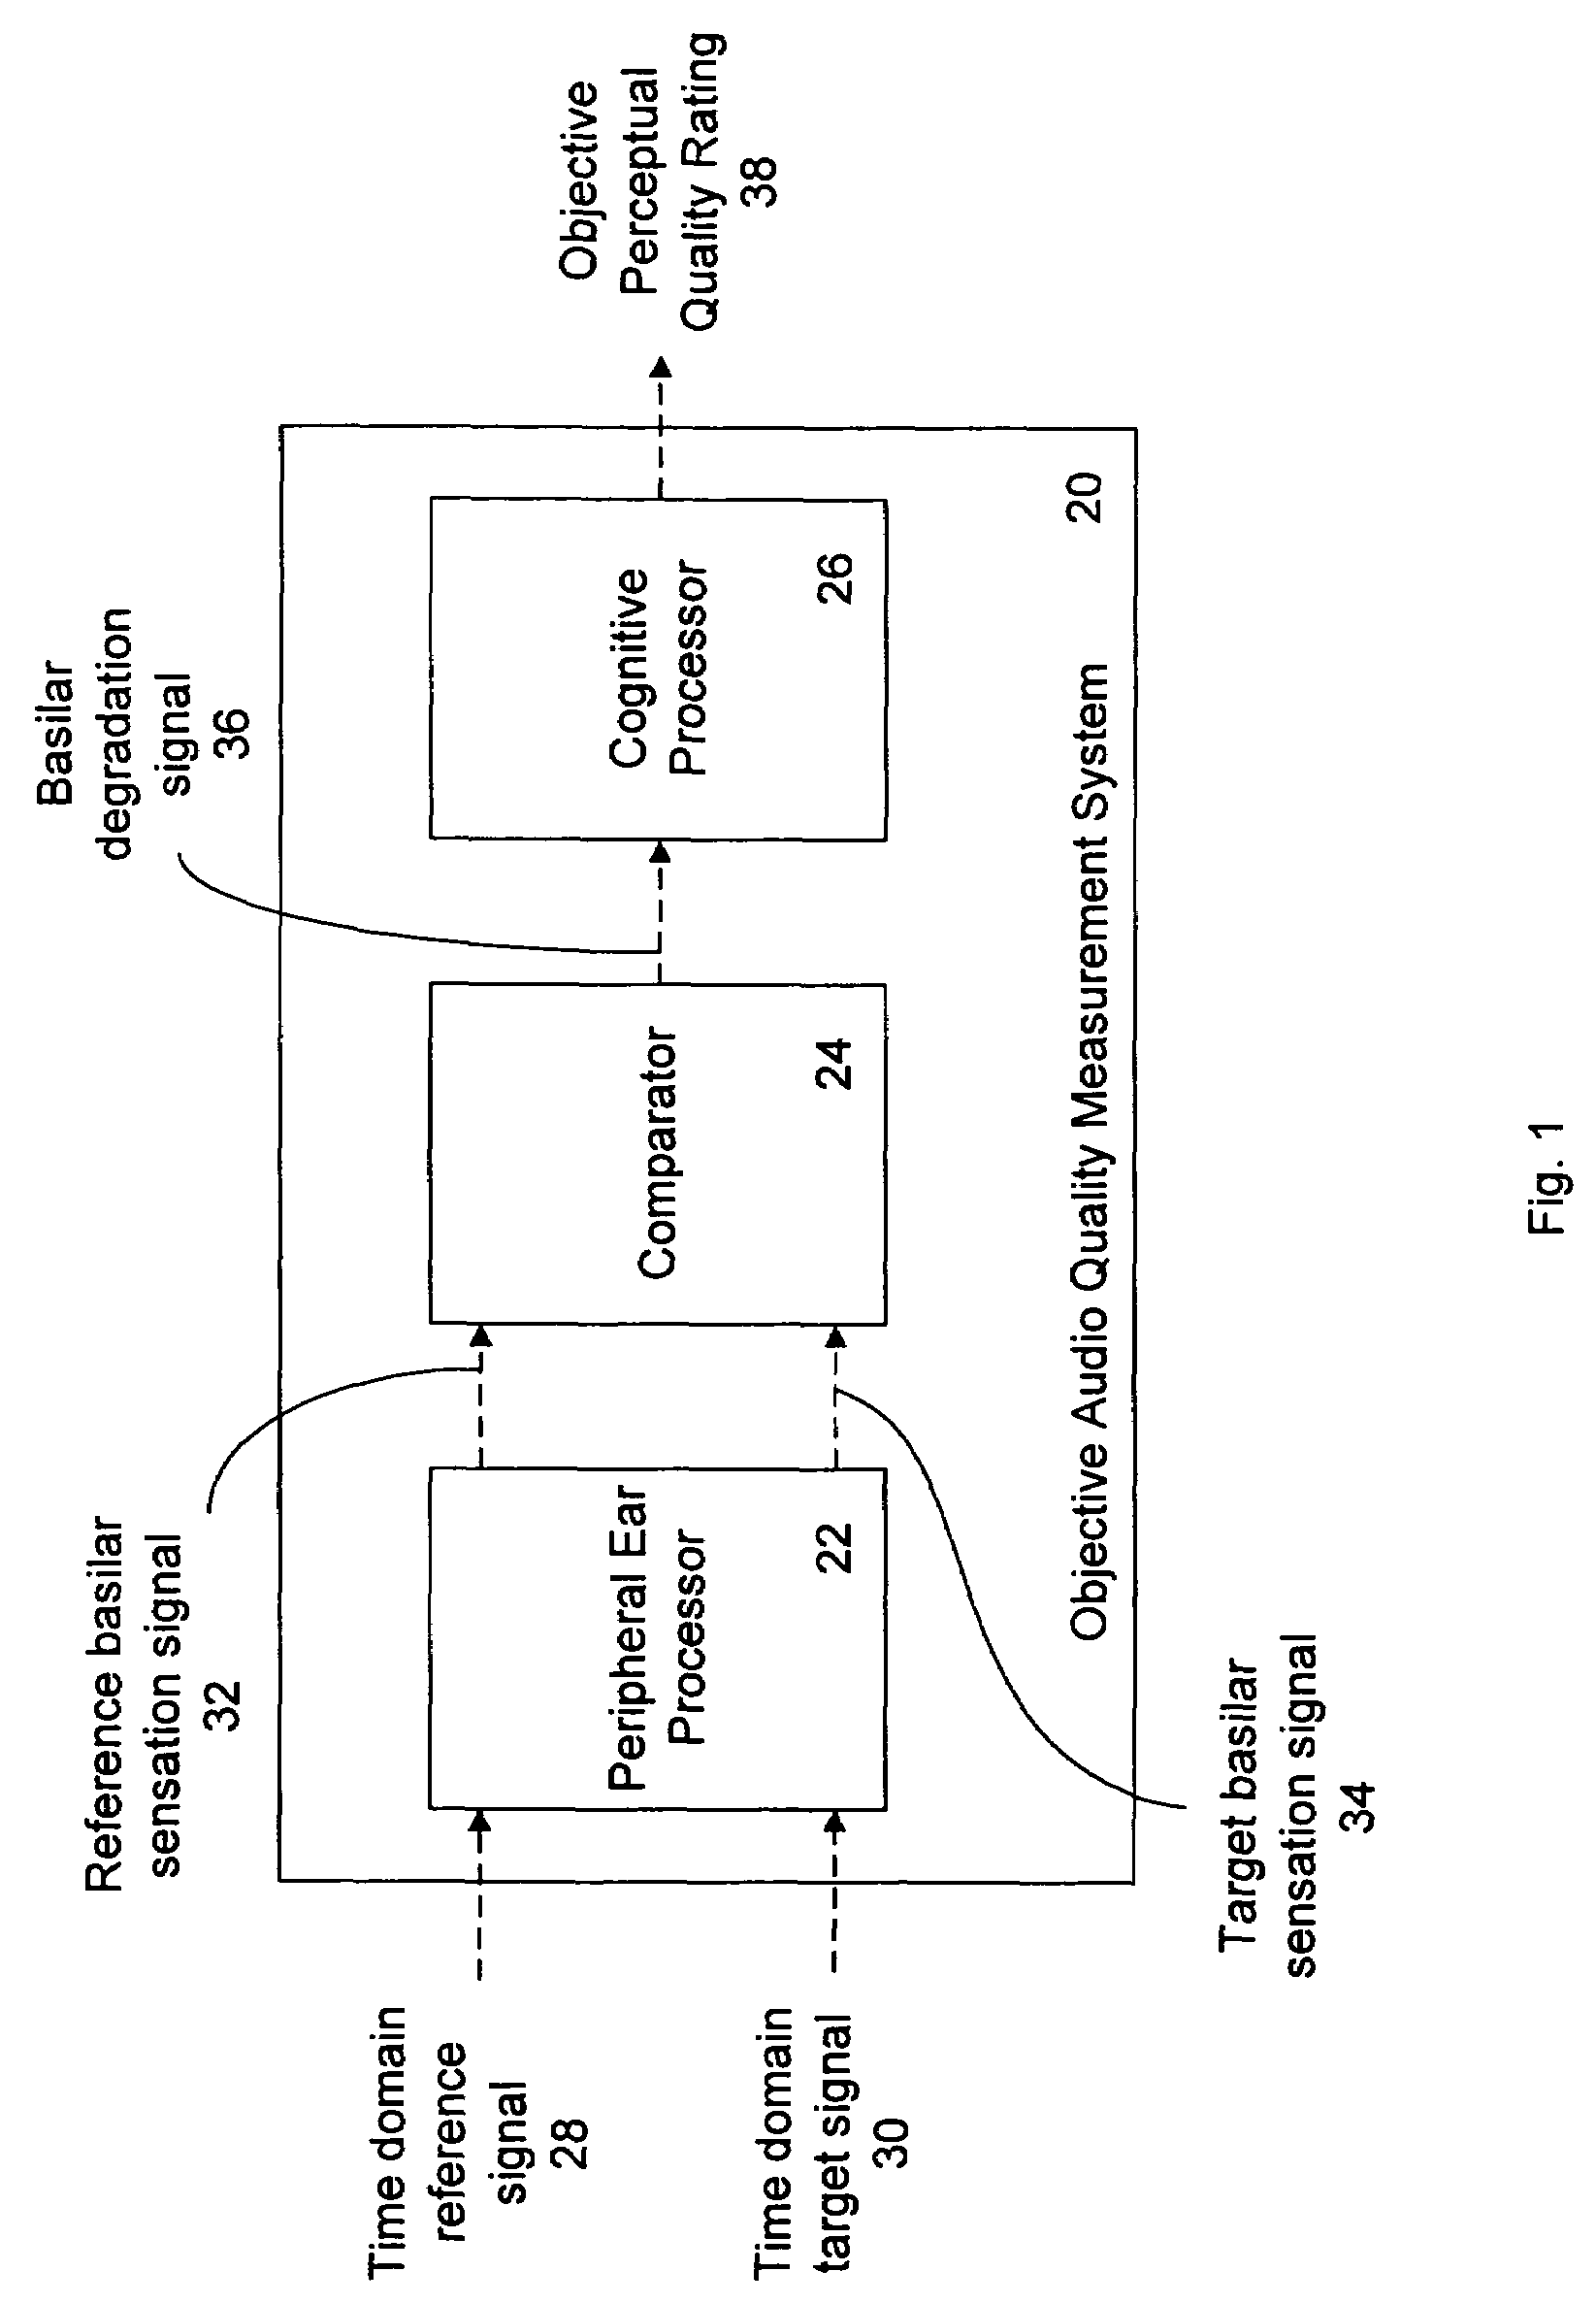 Process and system for objective audio quality measurement